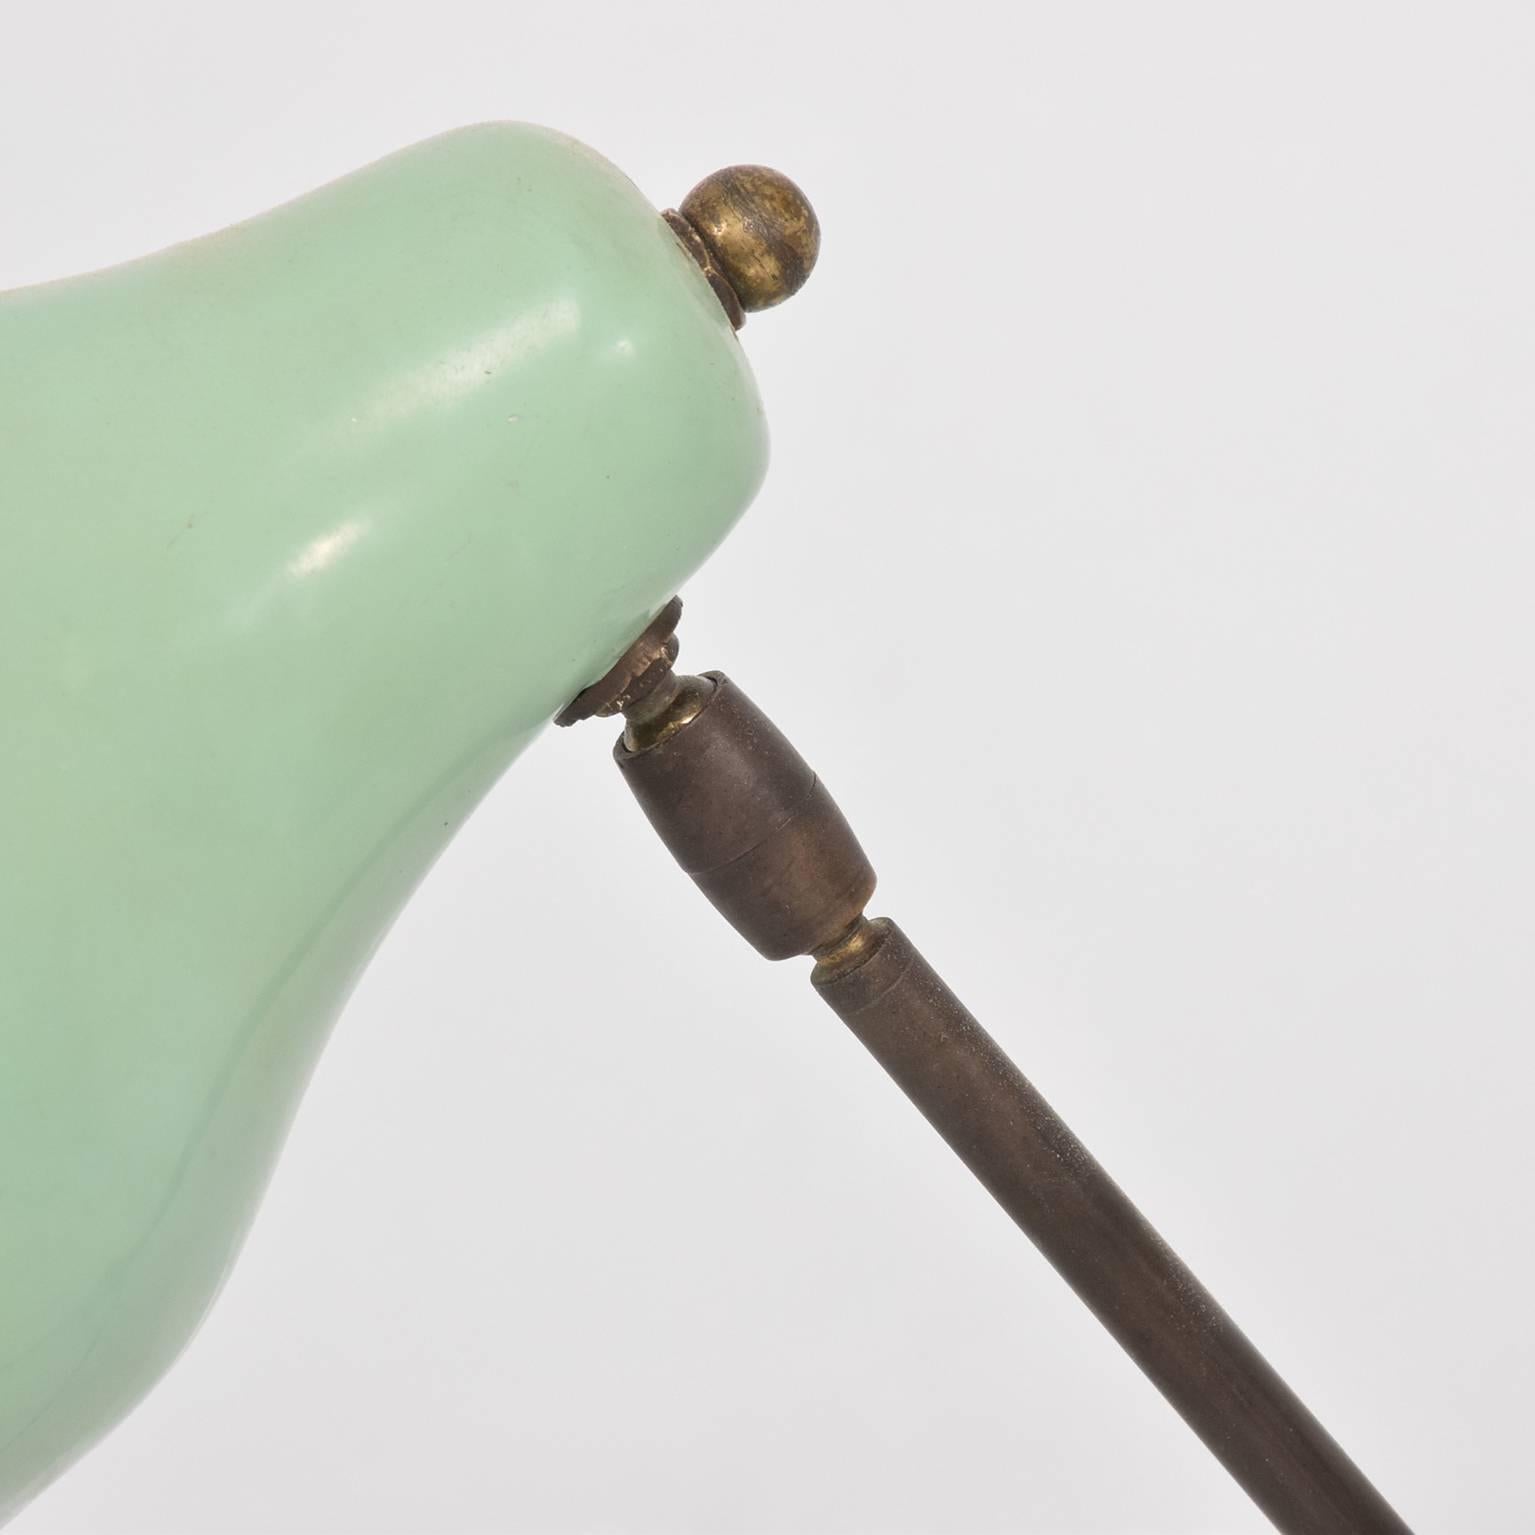 Painted Mid-Century Modern Italian Table Lamp Wall Sconce Lime Green Color Brass Body